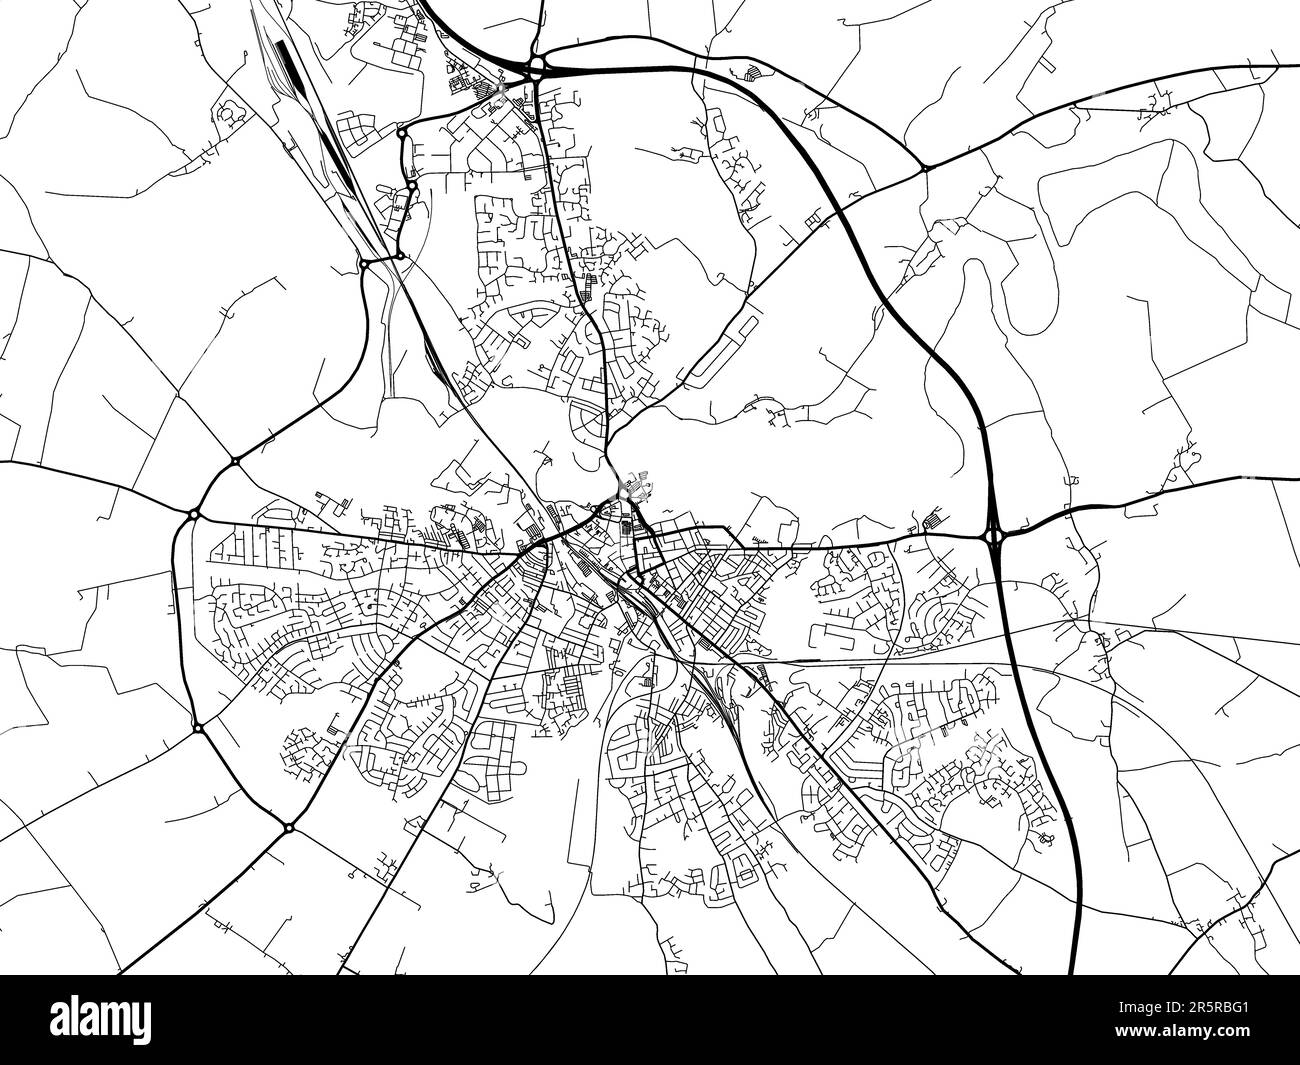 Road map of the city of  Carlisle in the United Kingdom on a white background. Stock Photo